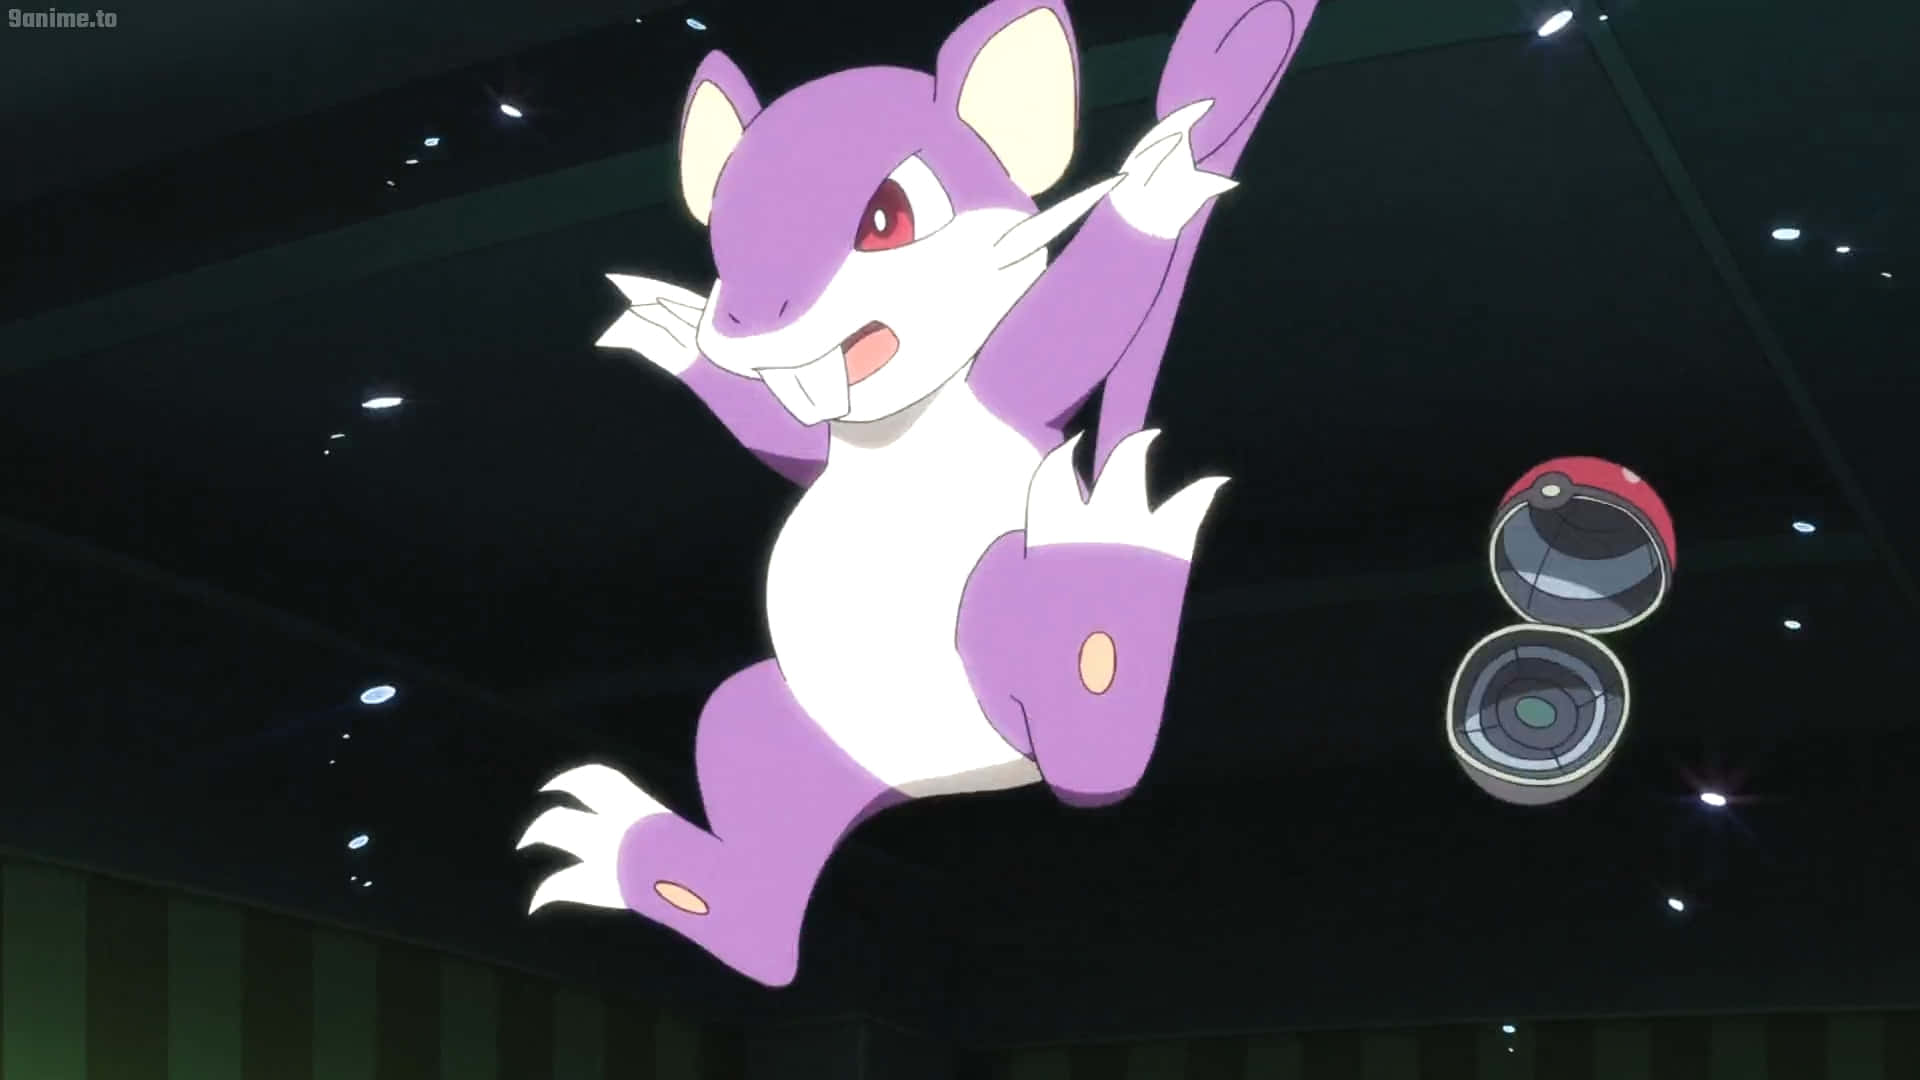 Pokemon Rattata Falling From The Top In Black Background. Wallpaper